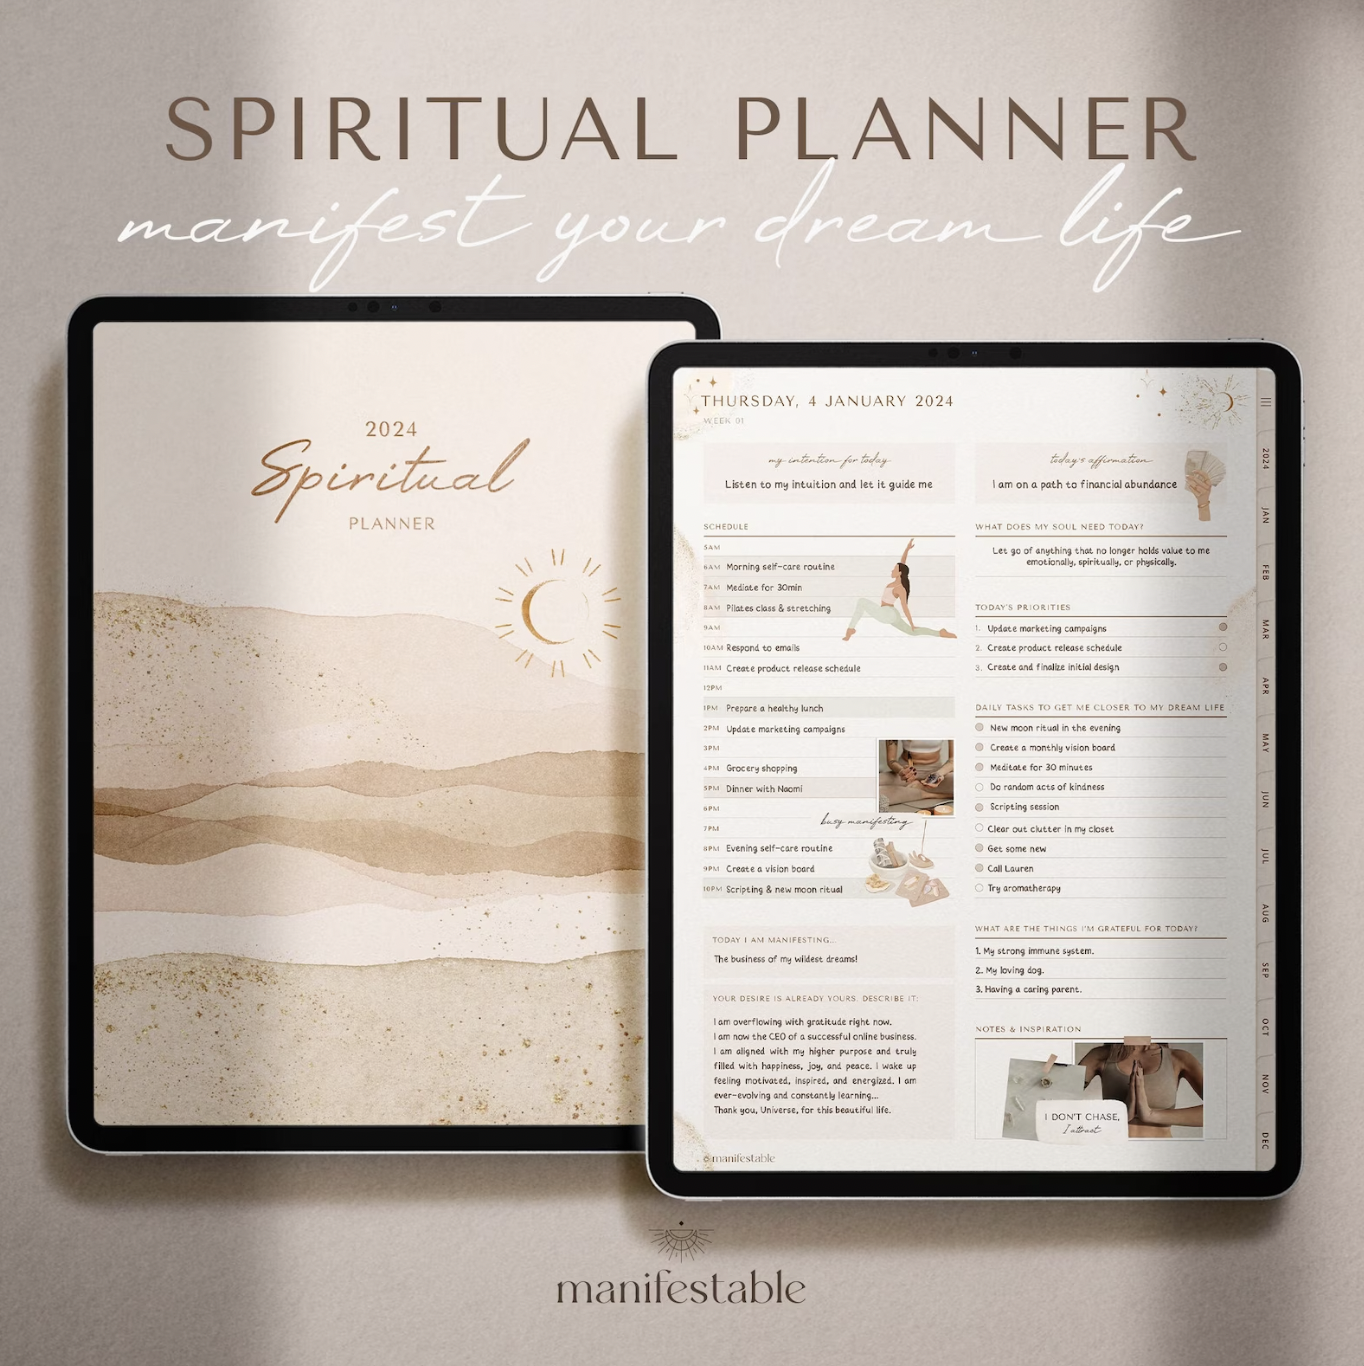 Overview of Manifestable’s 2024 Digital Spiritual Planner with 2 iPads showing the planner cover and daily planner 